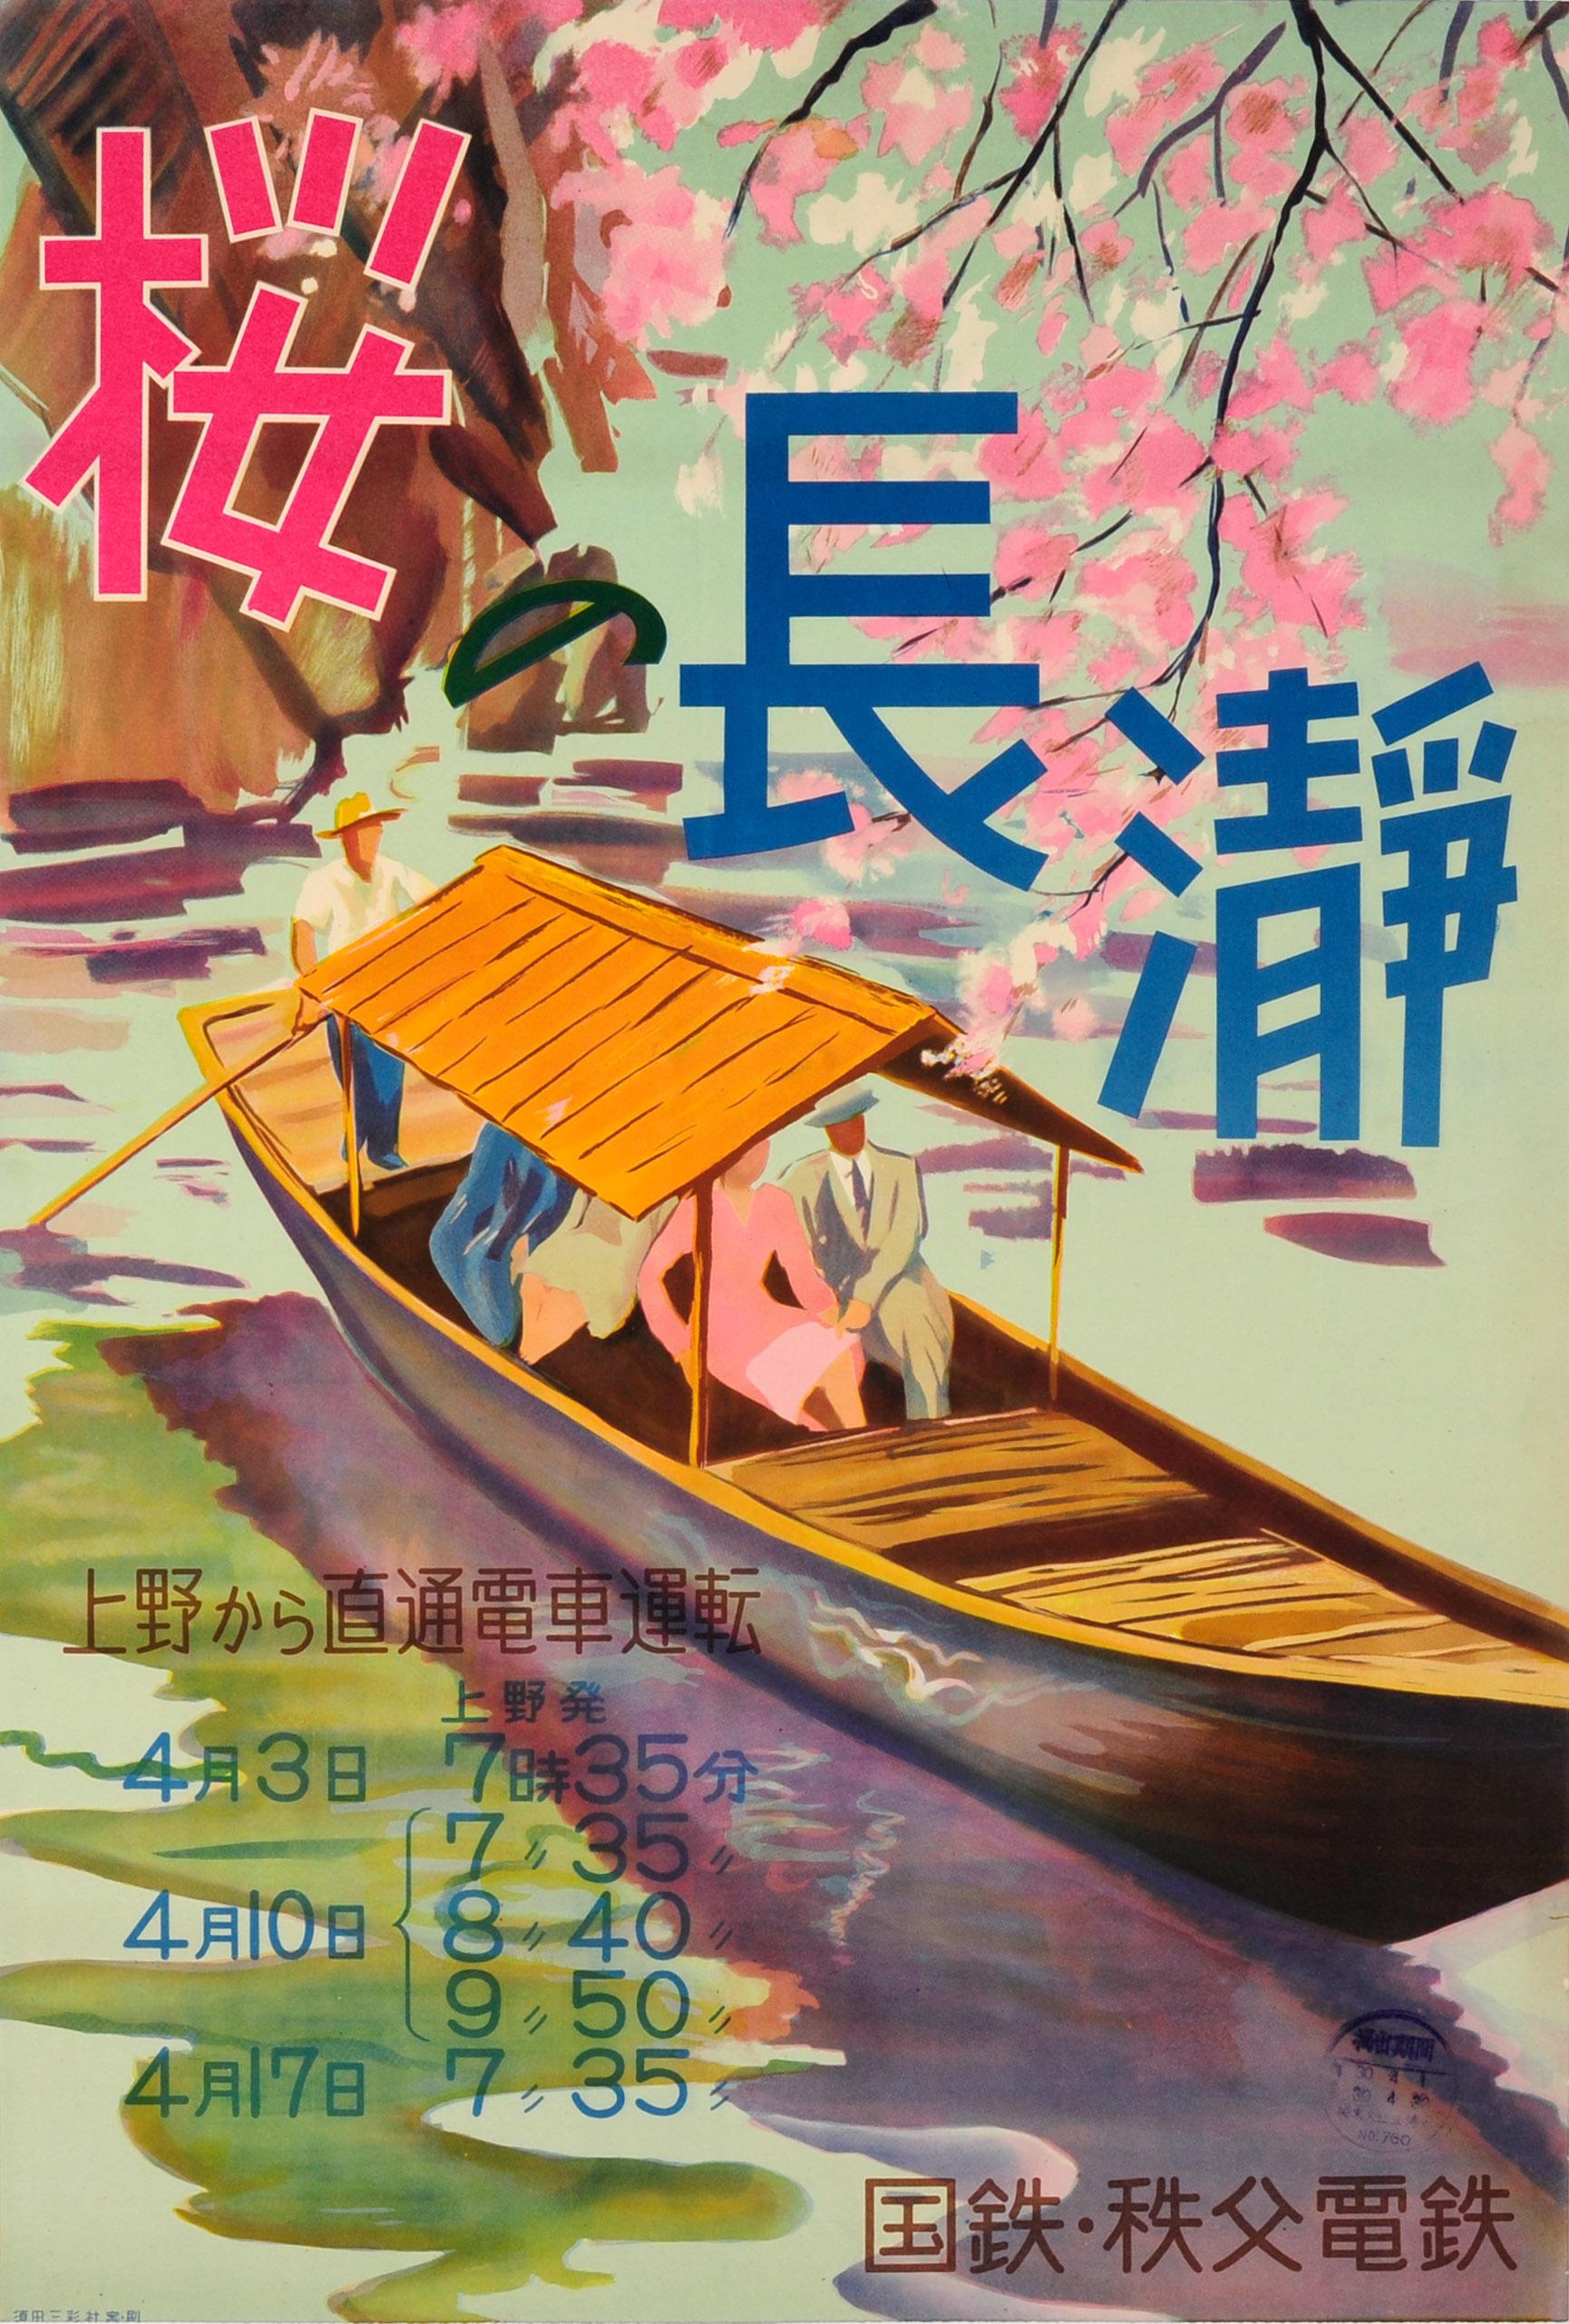 Unknown Print - Original Vintage Japan Travel Poster Spring Cherry Blossoms On River Boat Cruise